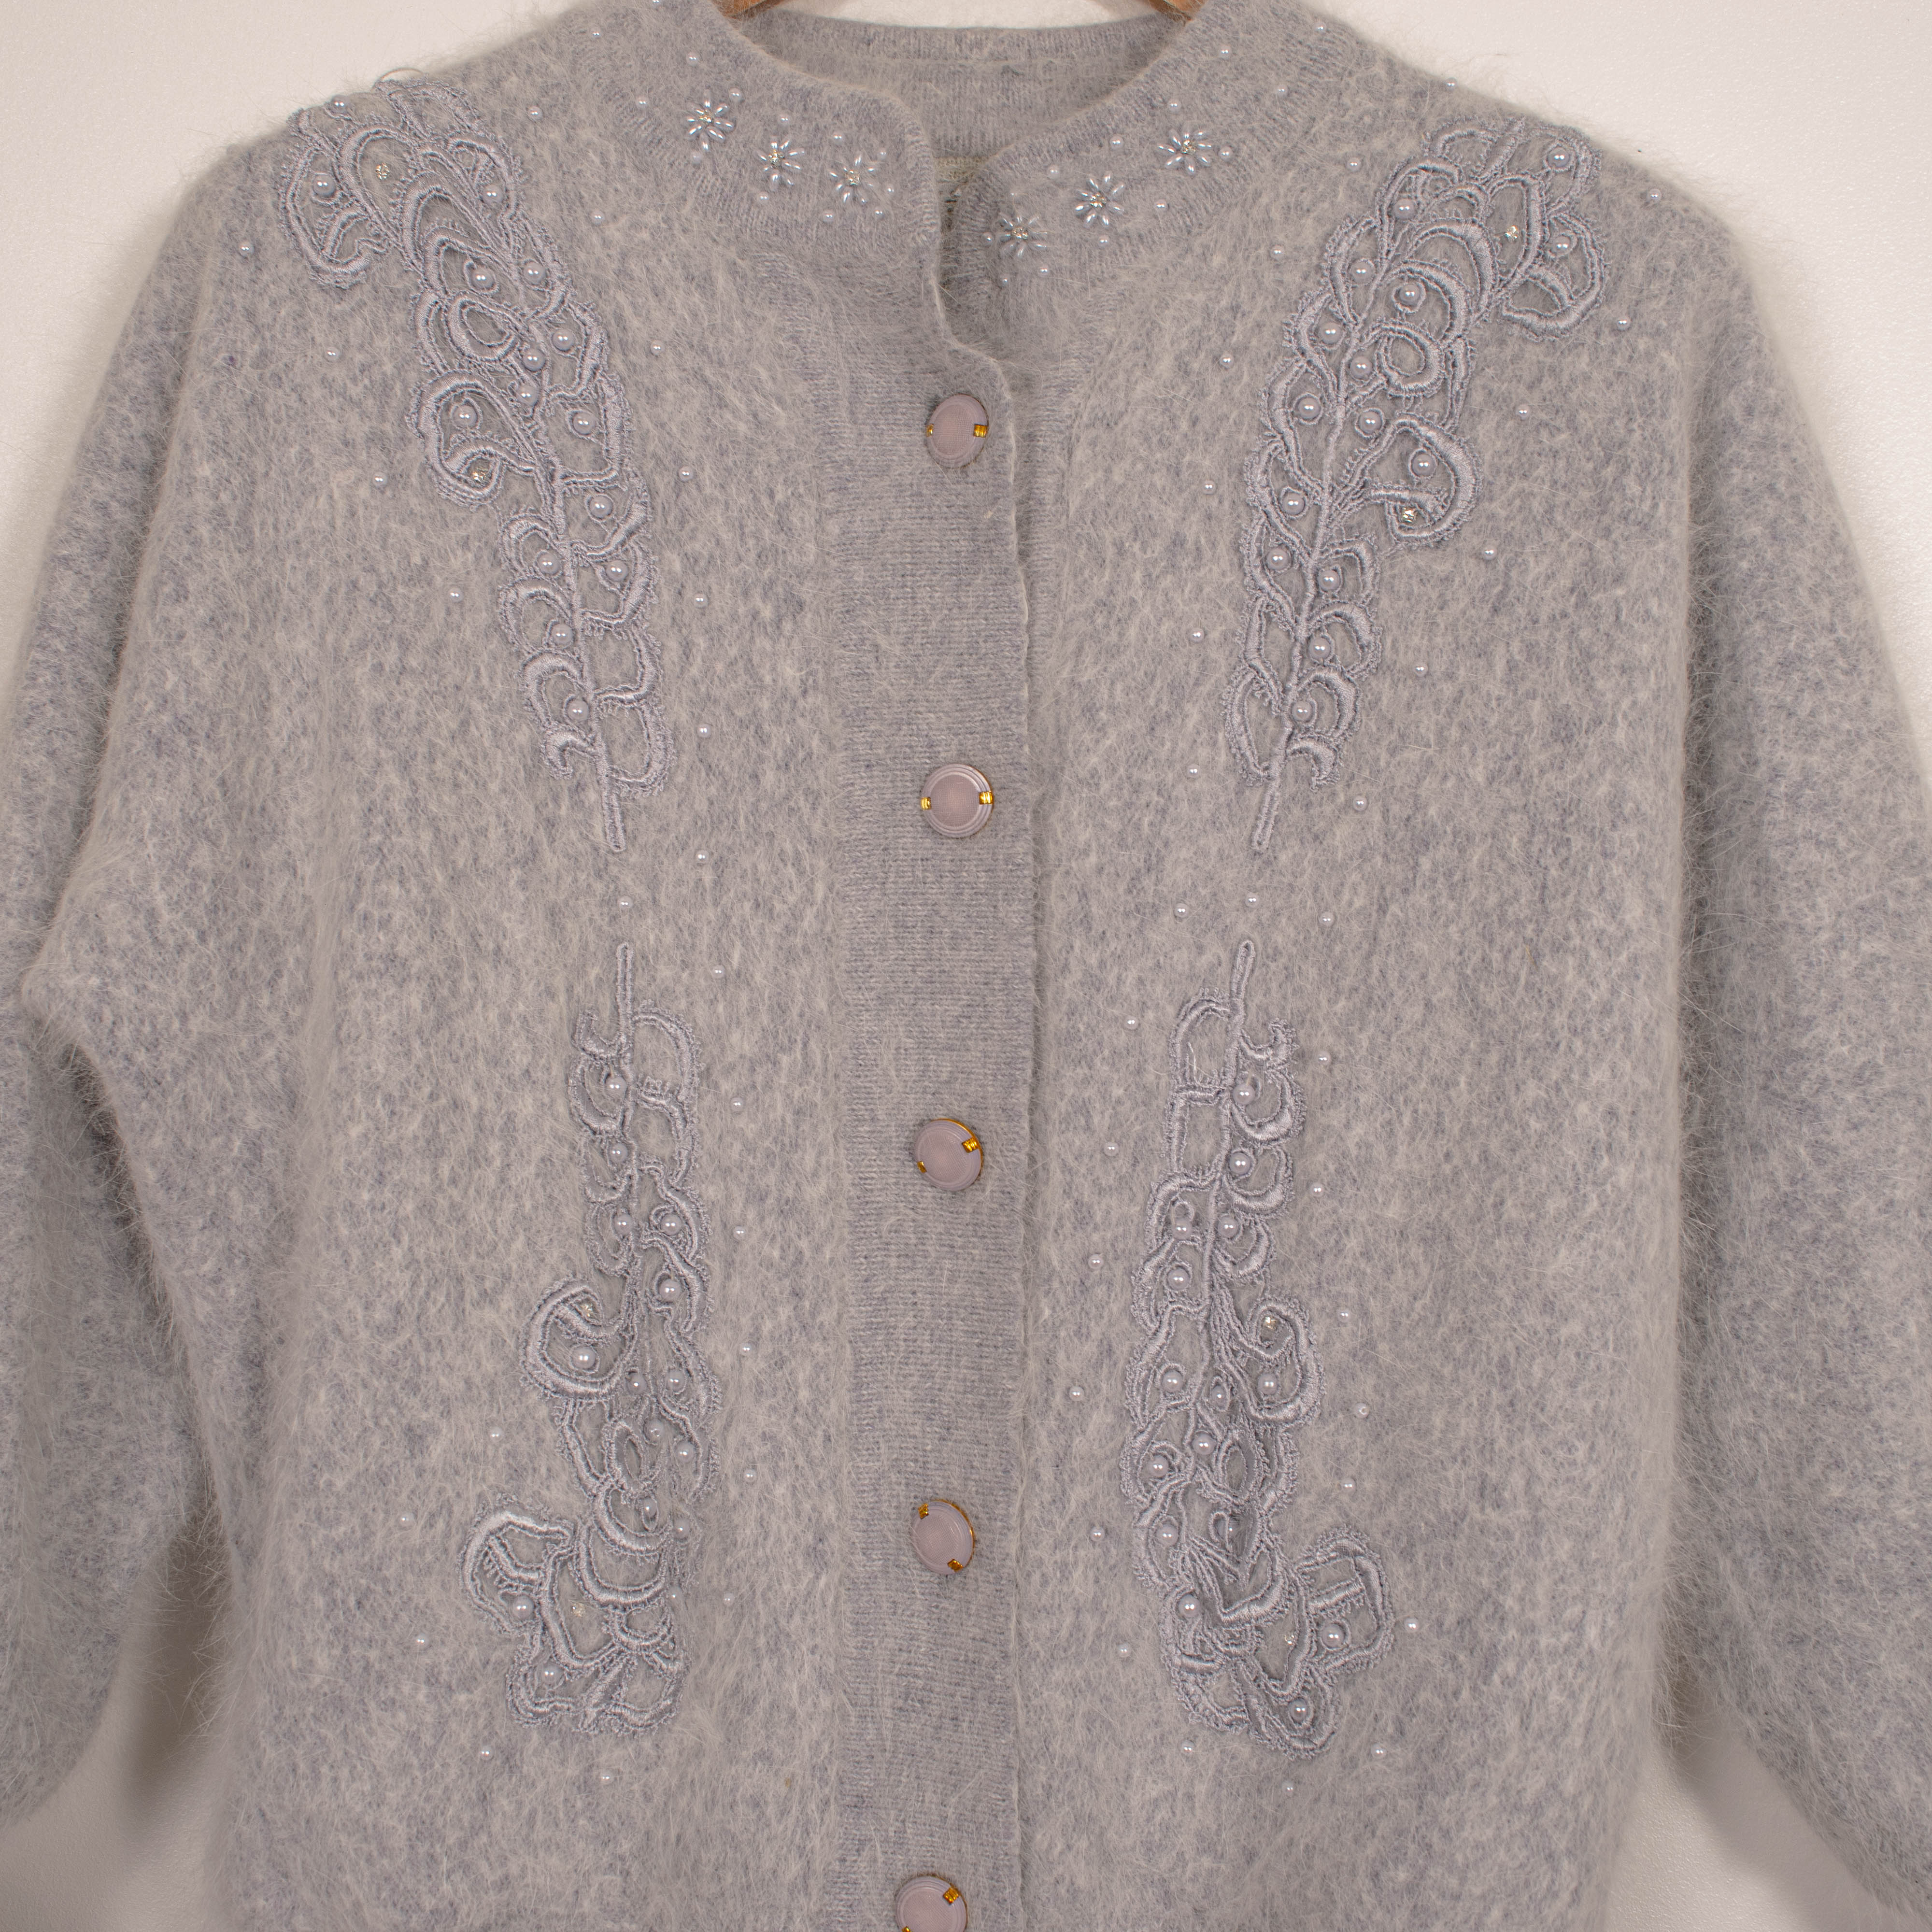 Shine Grey Button Up Sweater Floral Pearls Design Embroidery Angora Rabbit Wool Womens L